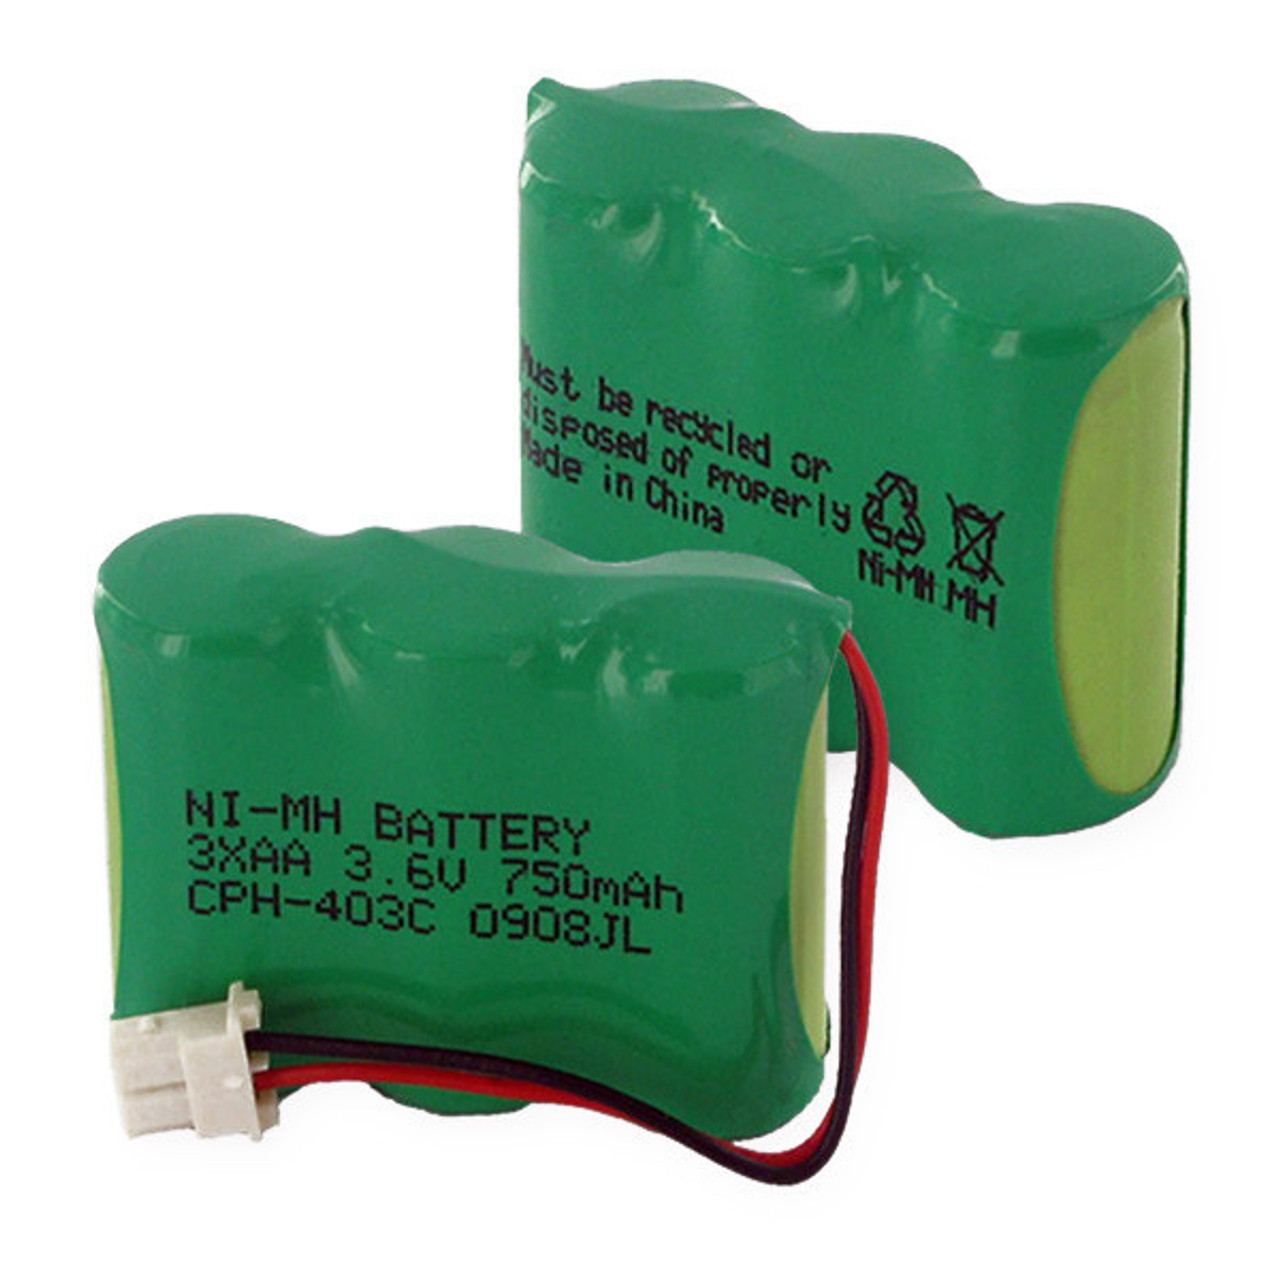 Battery backed